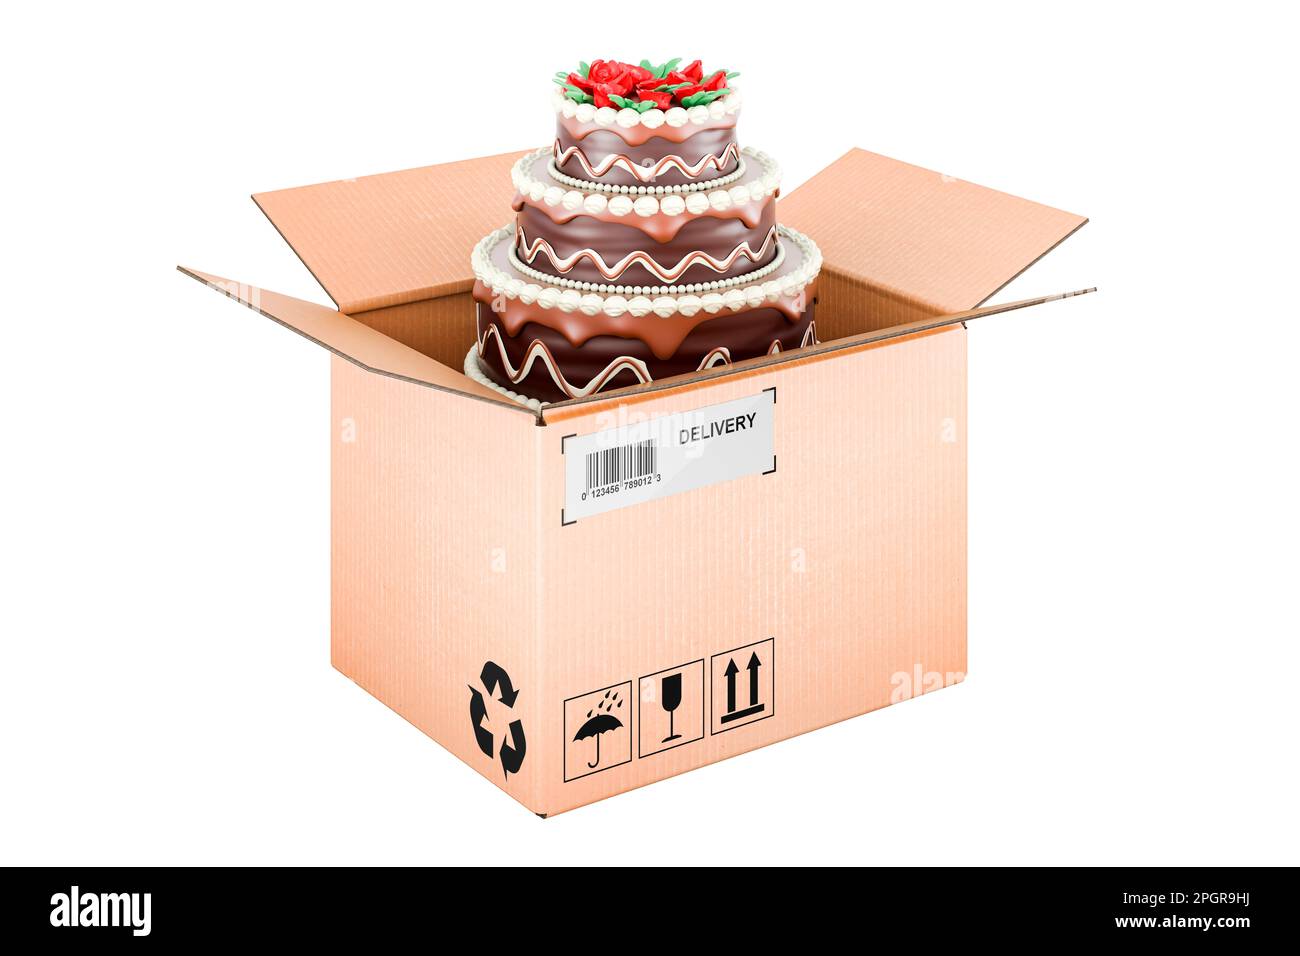 Chocolate Birthday Cake inside cardboard box, delivery concept. 3D rendering isolated on white background Stock Photo